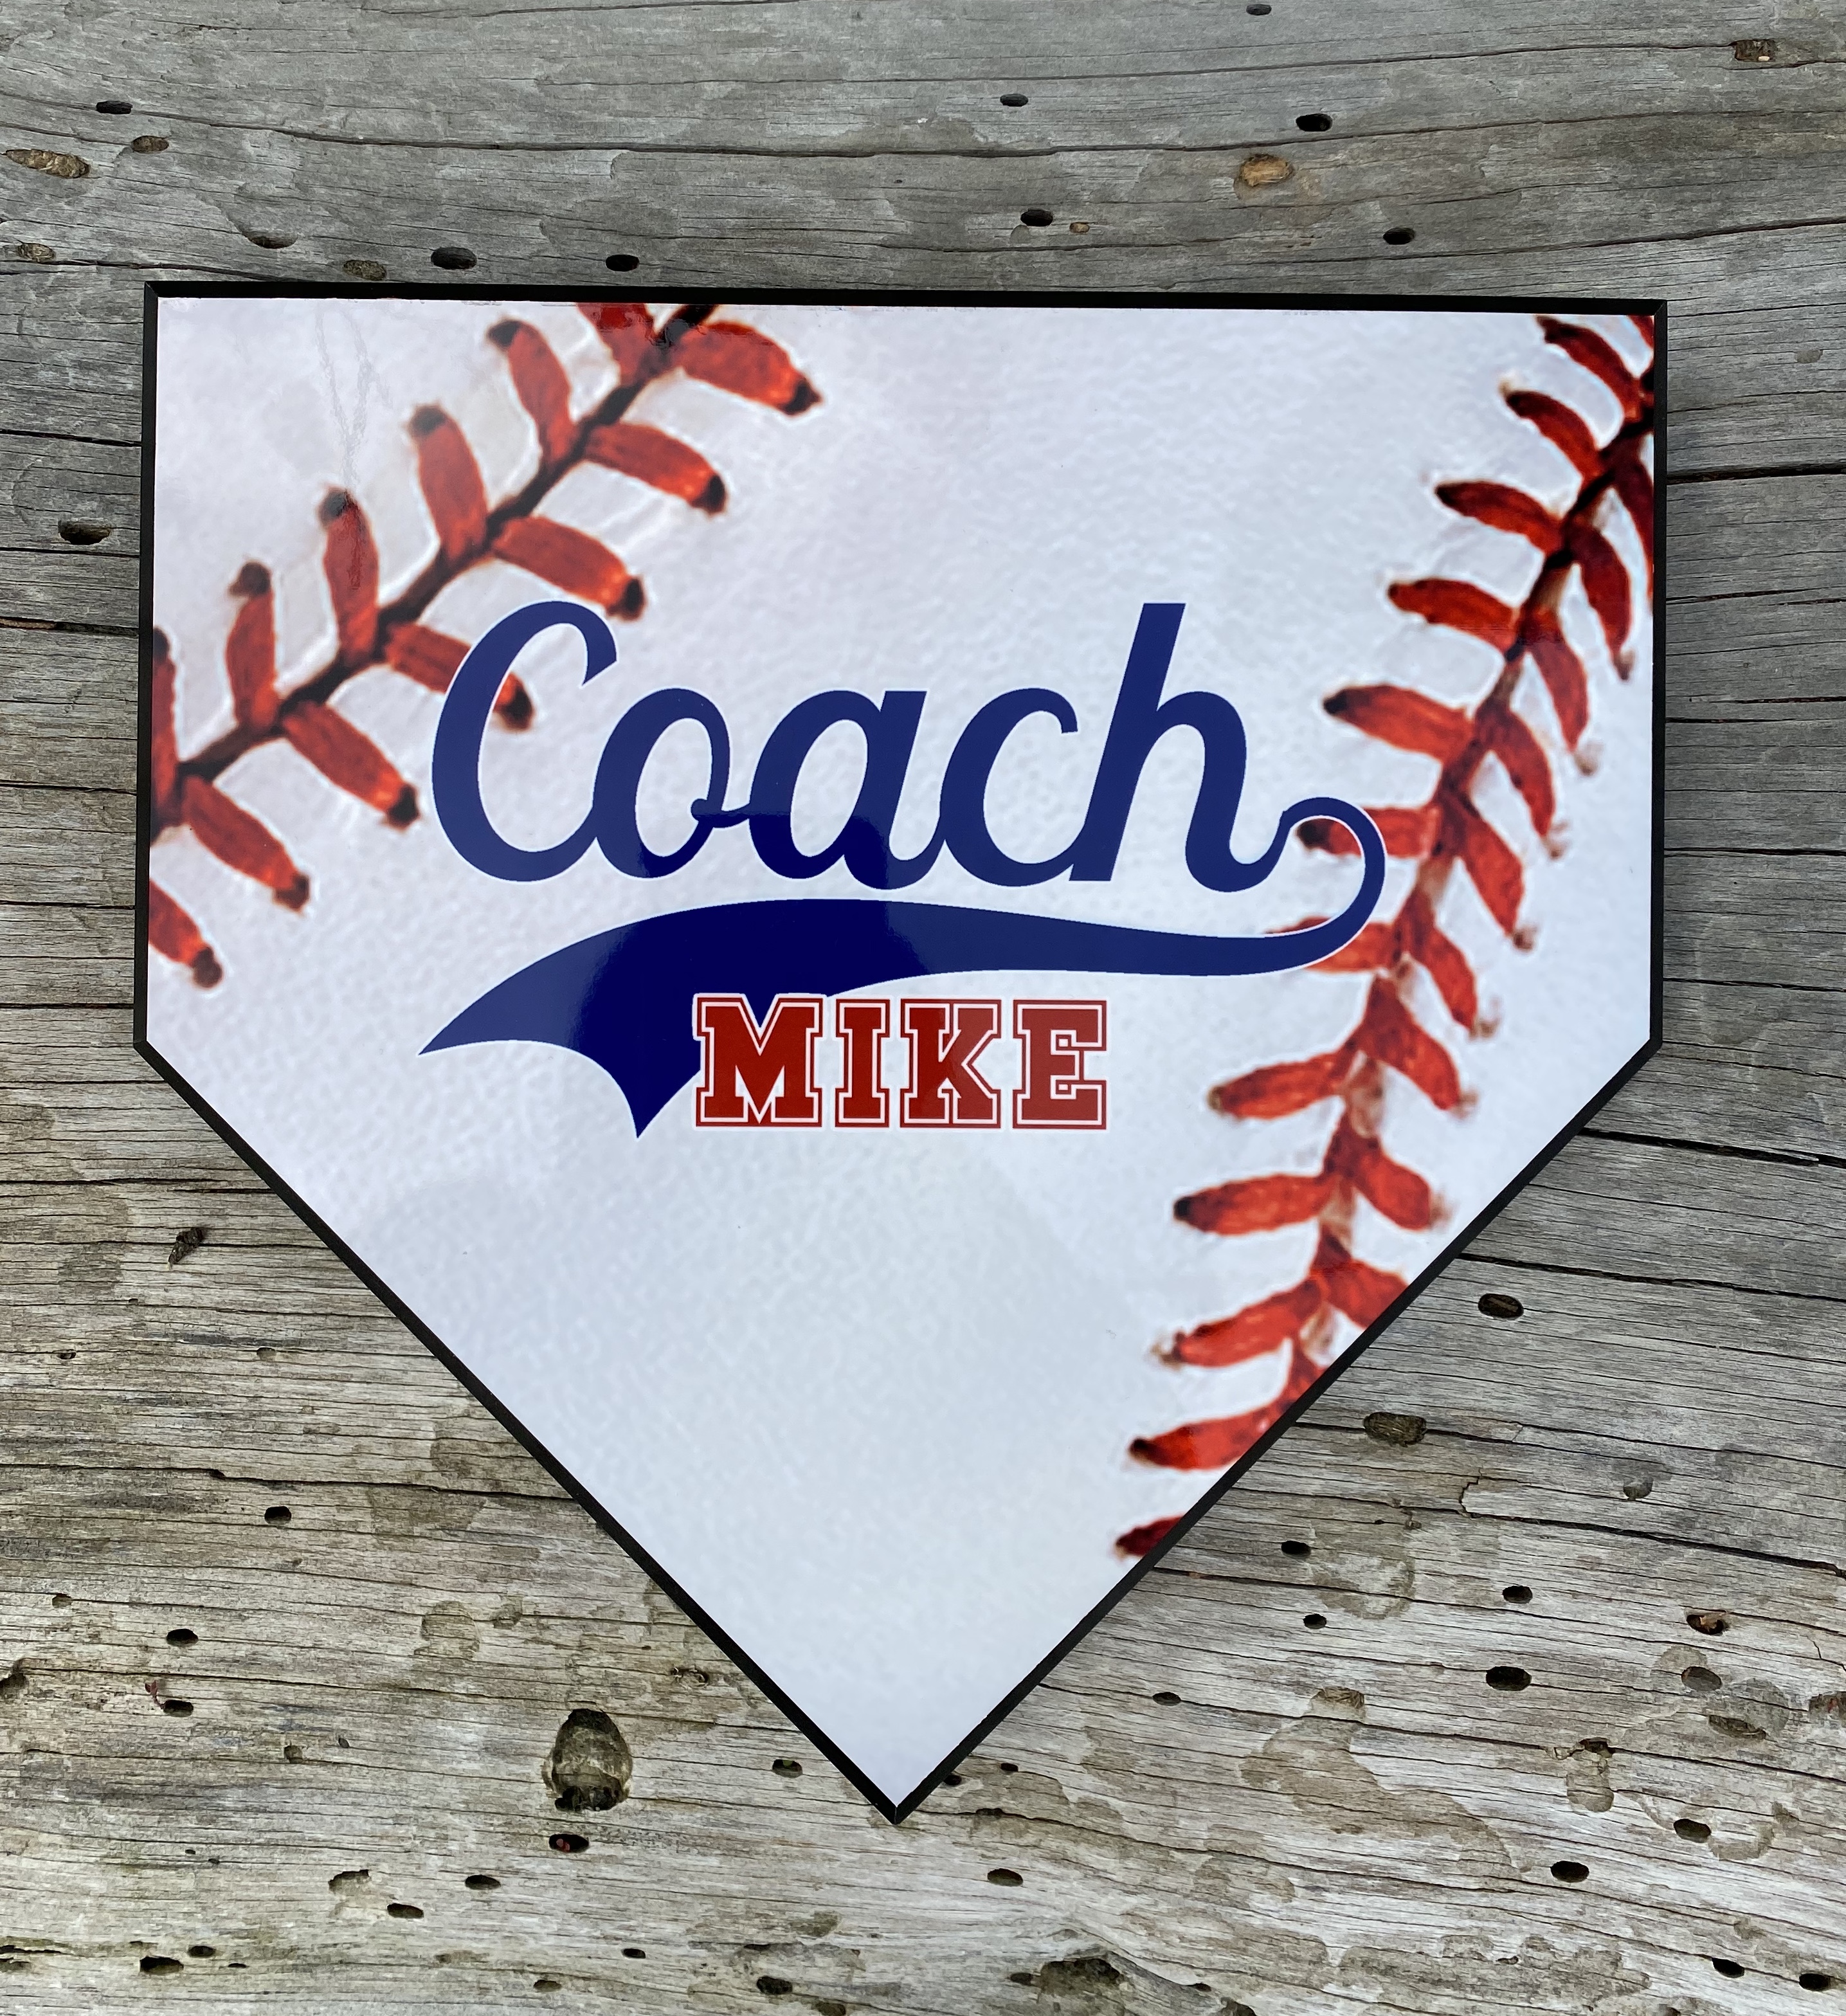 Use a permanent marker to sign this 10 x 10 home plate plaque for your coach.